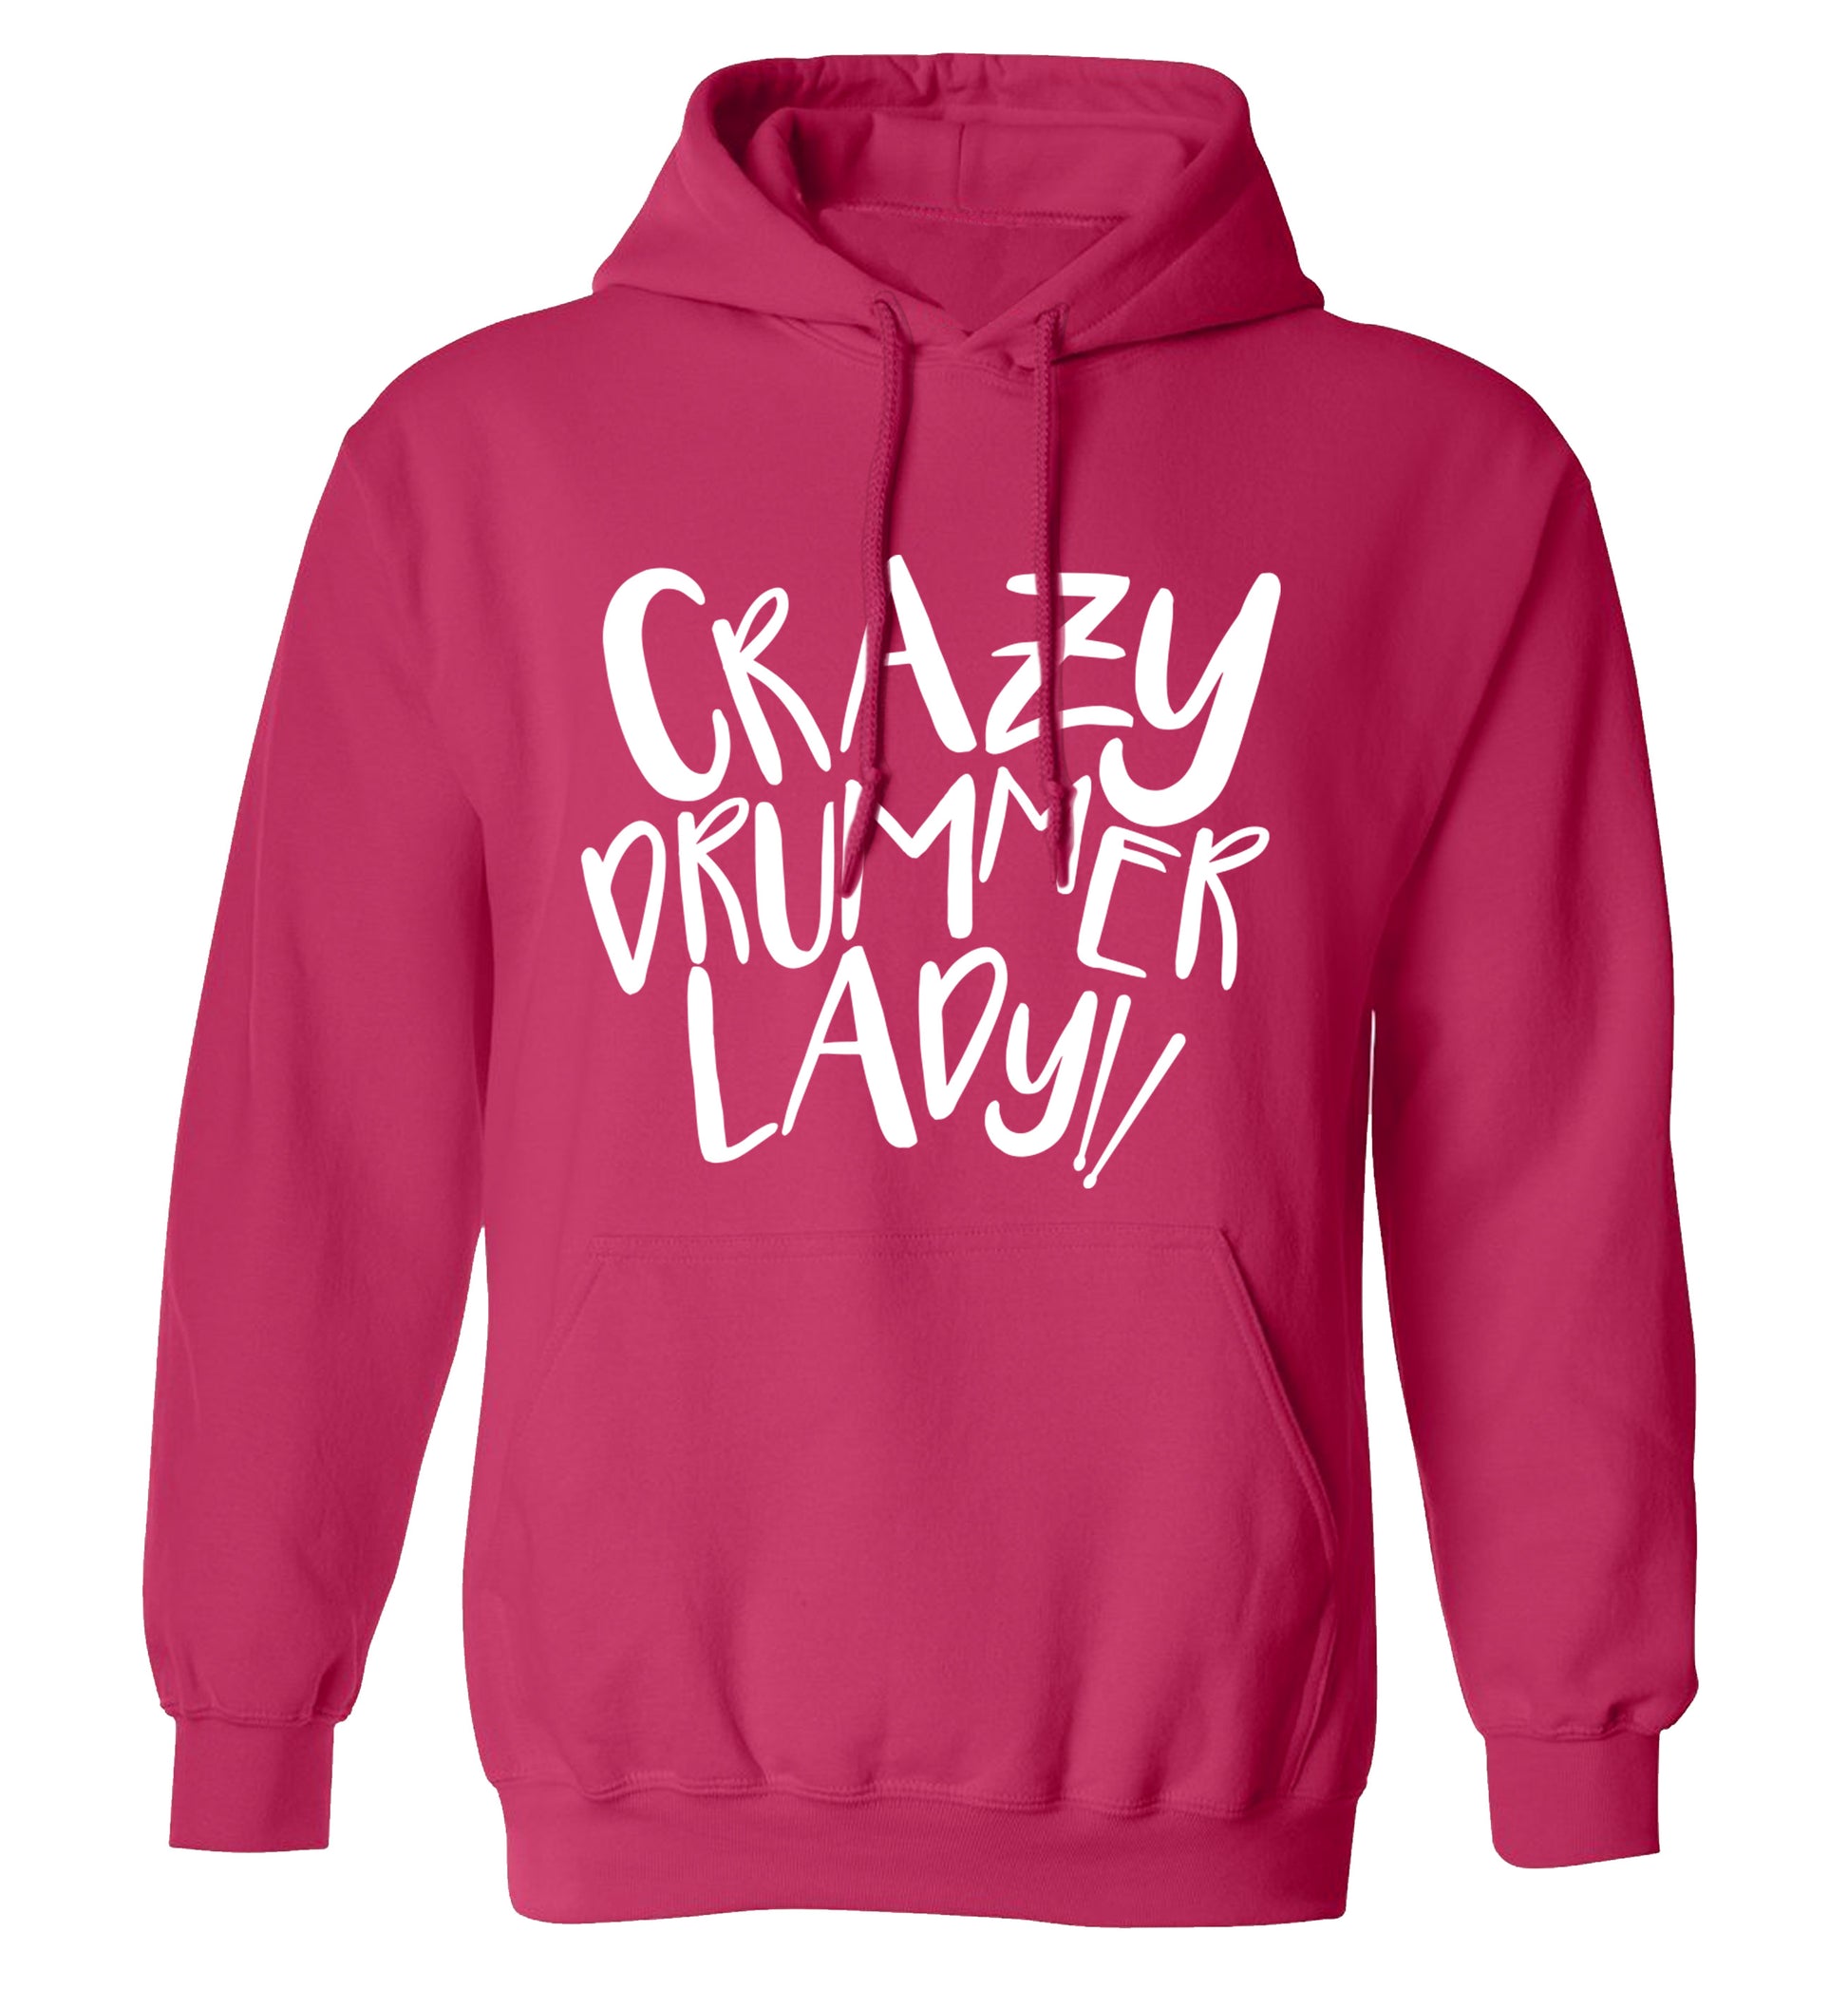 Crazy drummer lady adults unisex pink hoodie 2XL